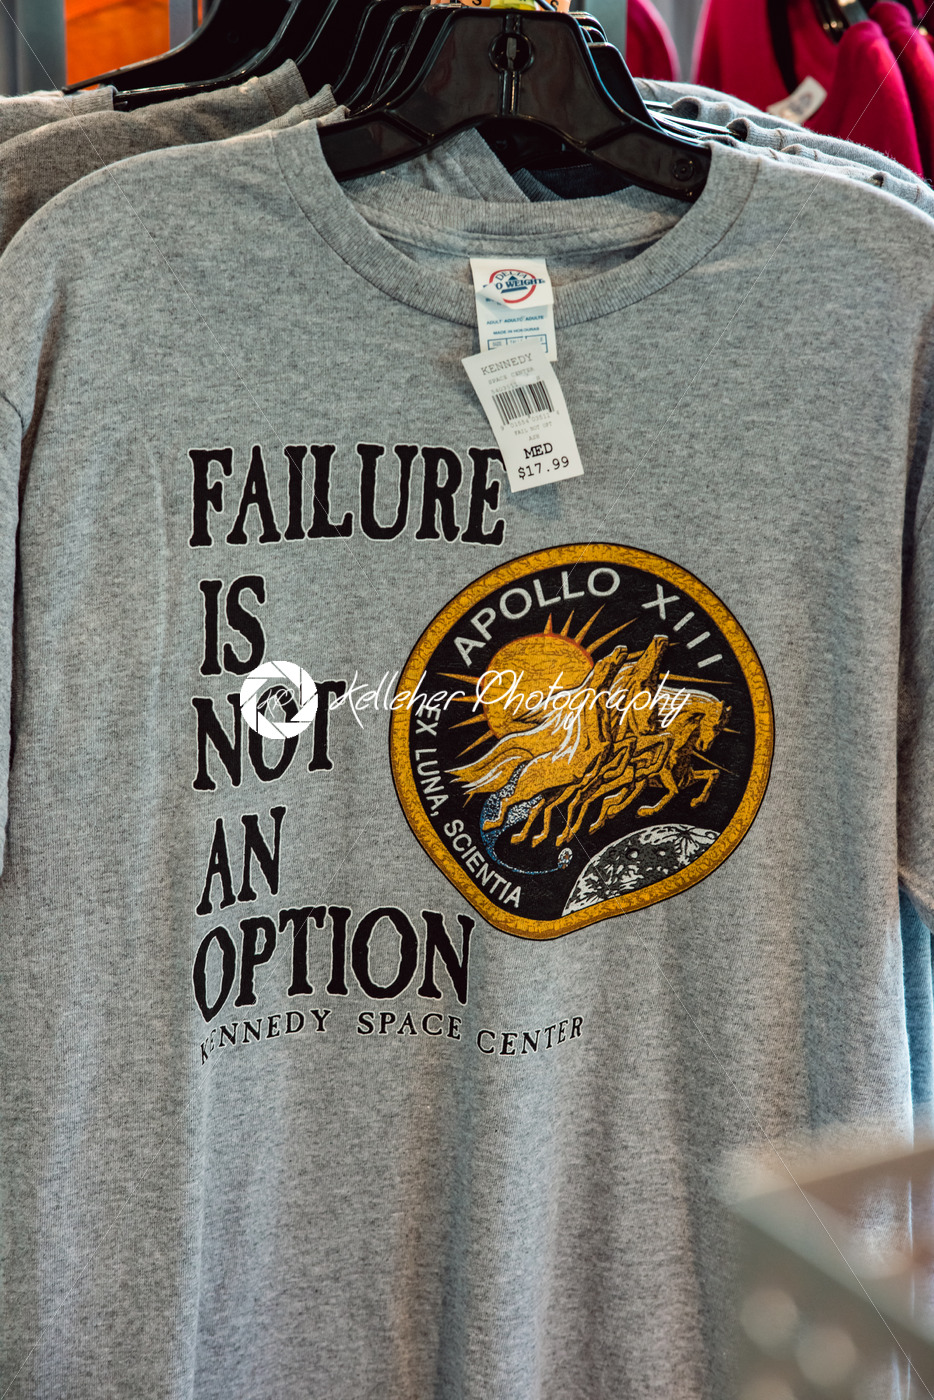 Cape Canaveral, Florida – August 13, 2018: Failure is not an option Apollo 13 shirt at NASA Kennedy Space Center - Kelleher Photography Store